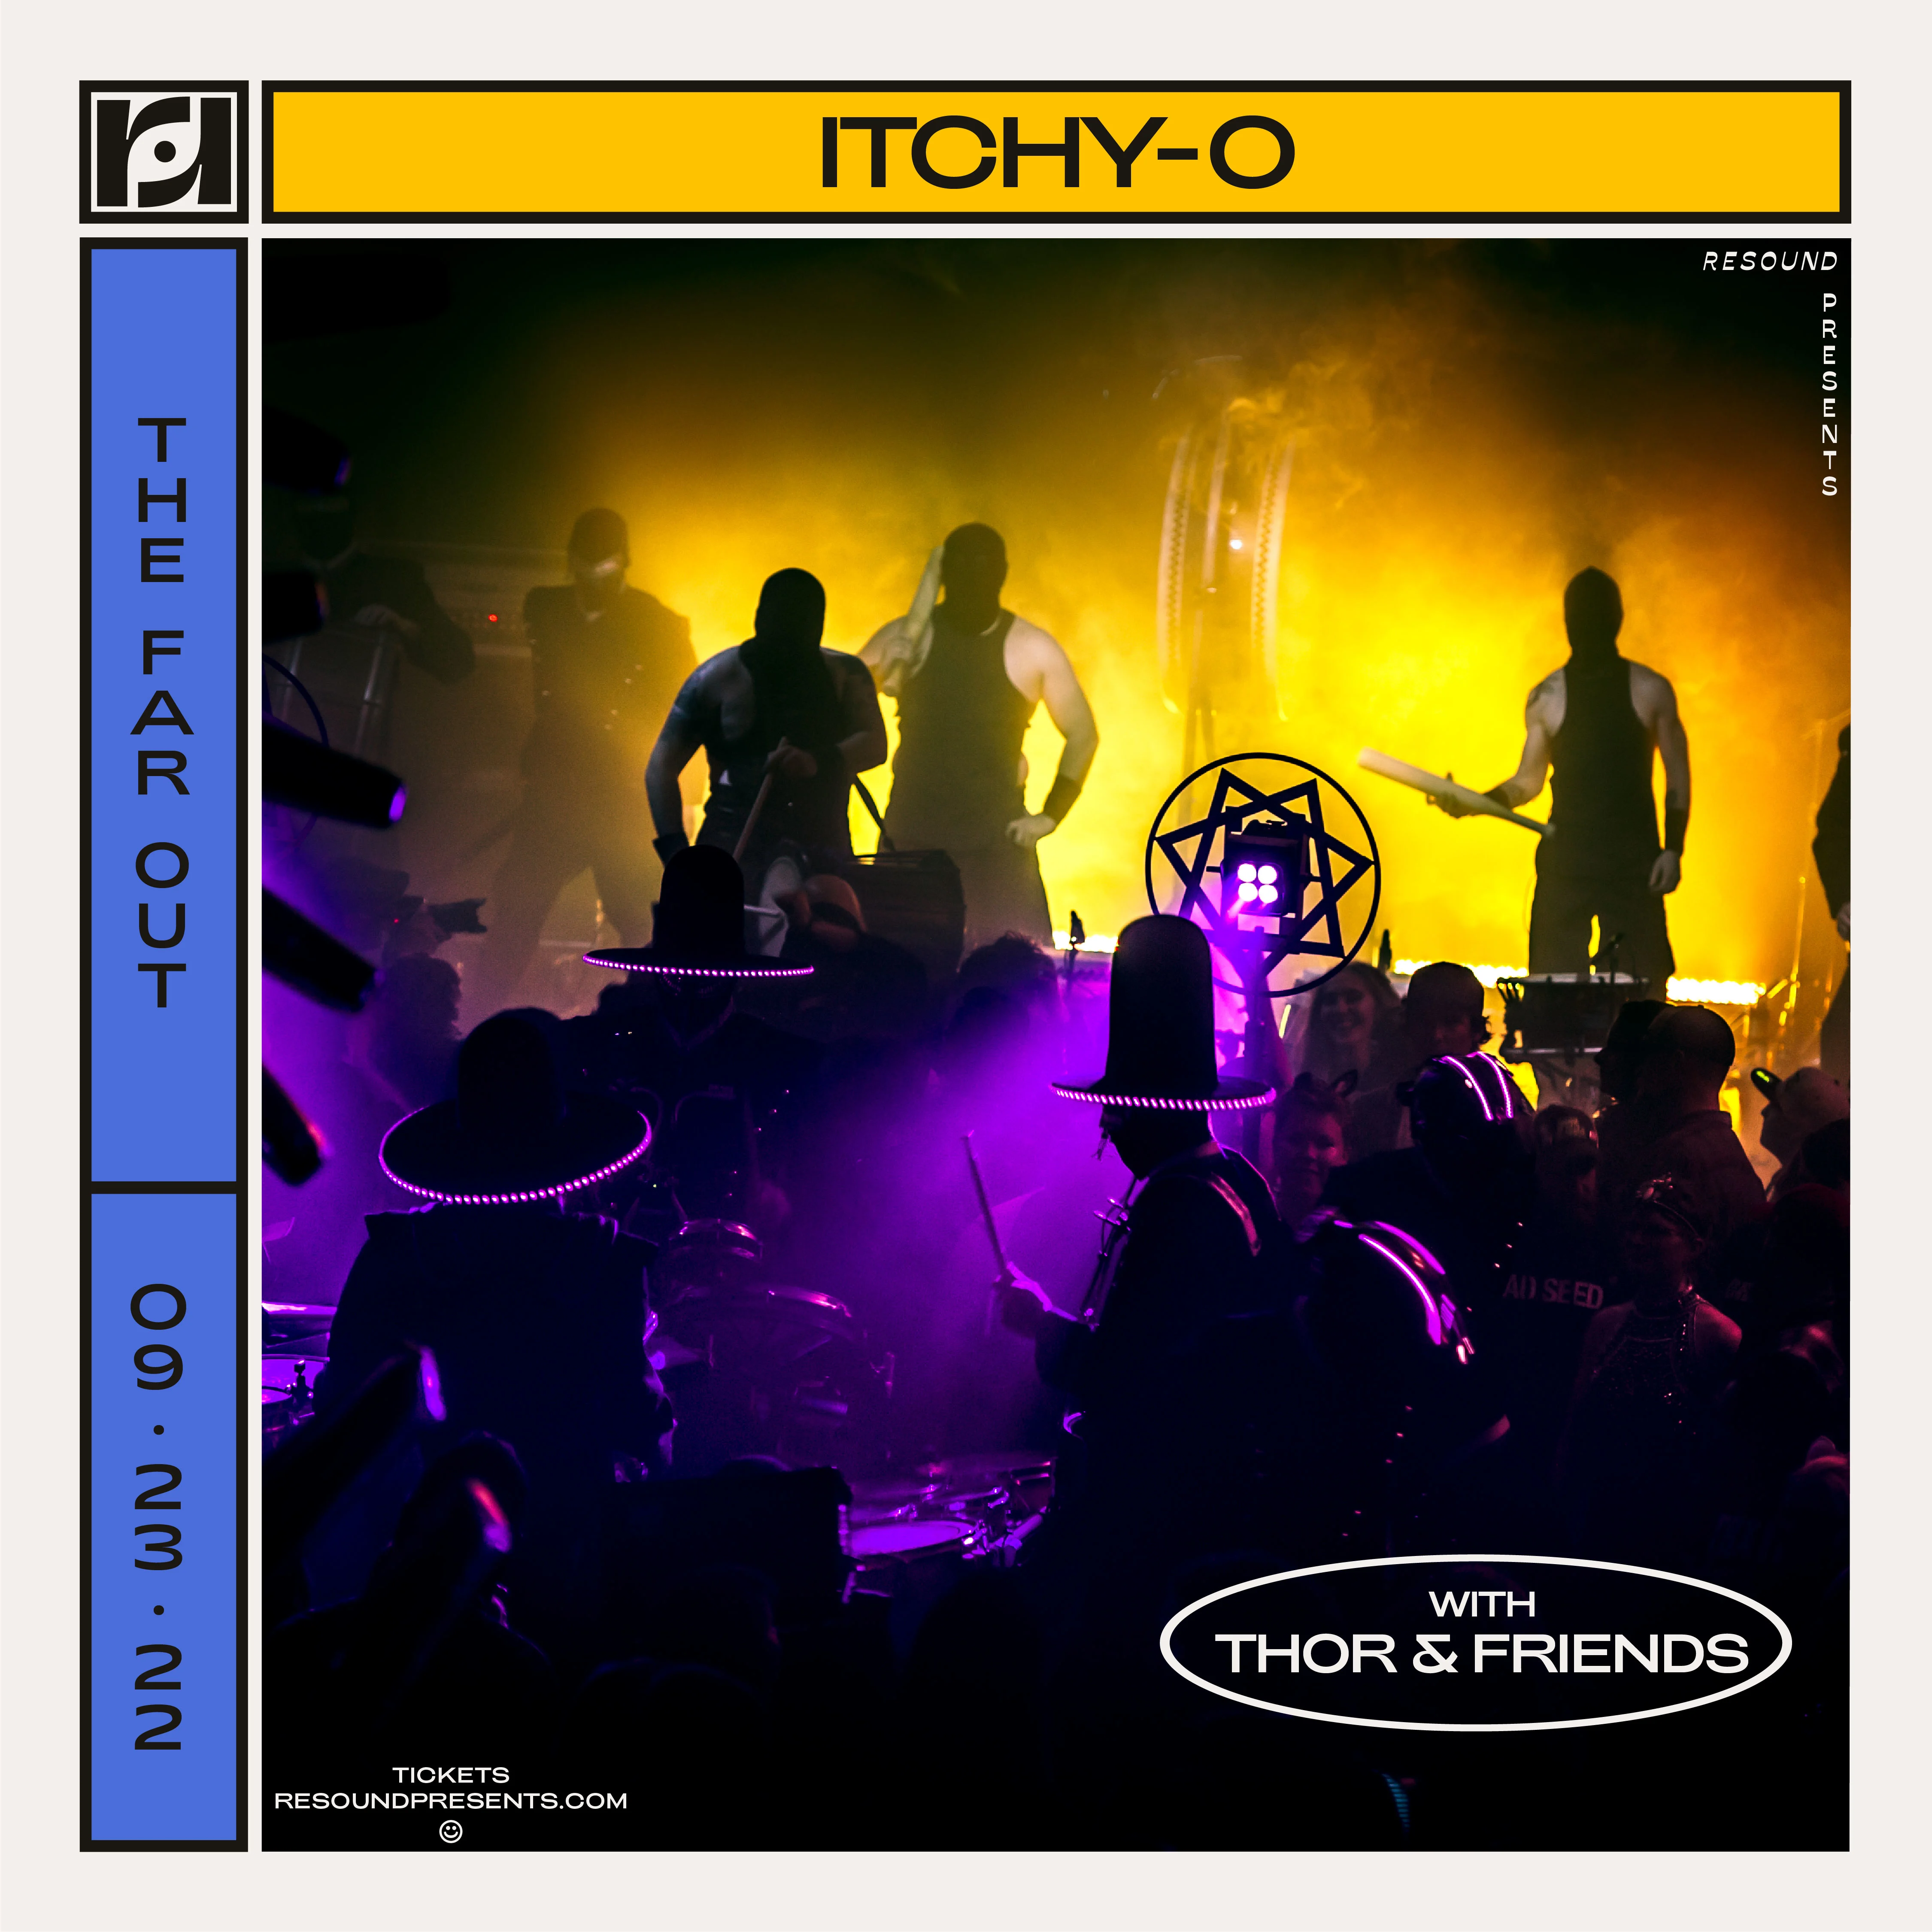 Itchy-O and Thor & Friends at the Far Out Lounge on September 23, 2022.